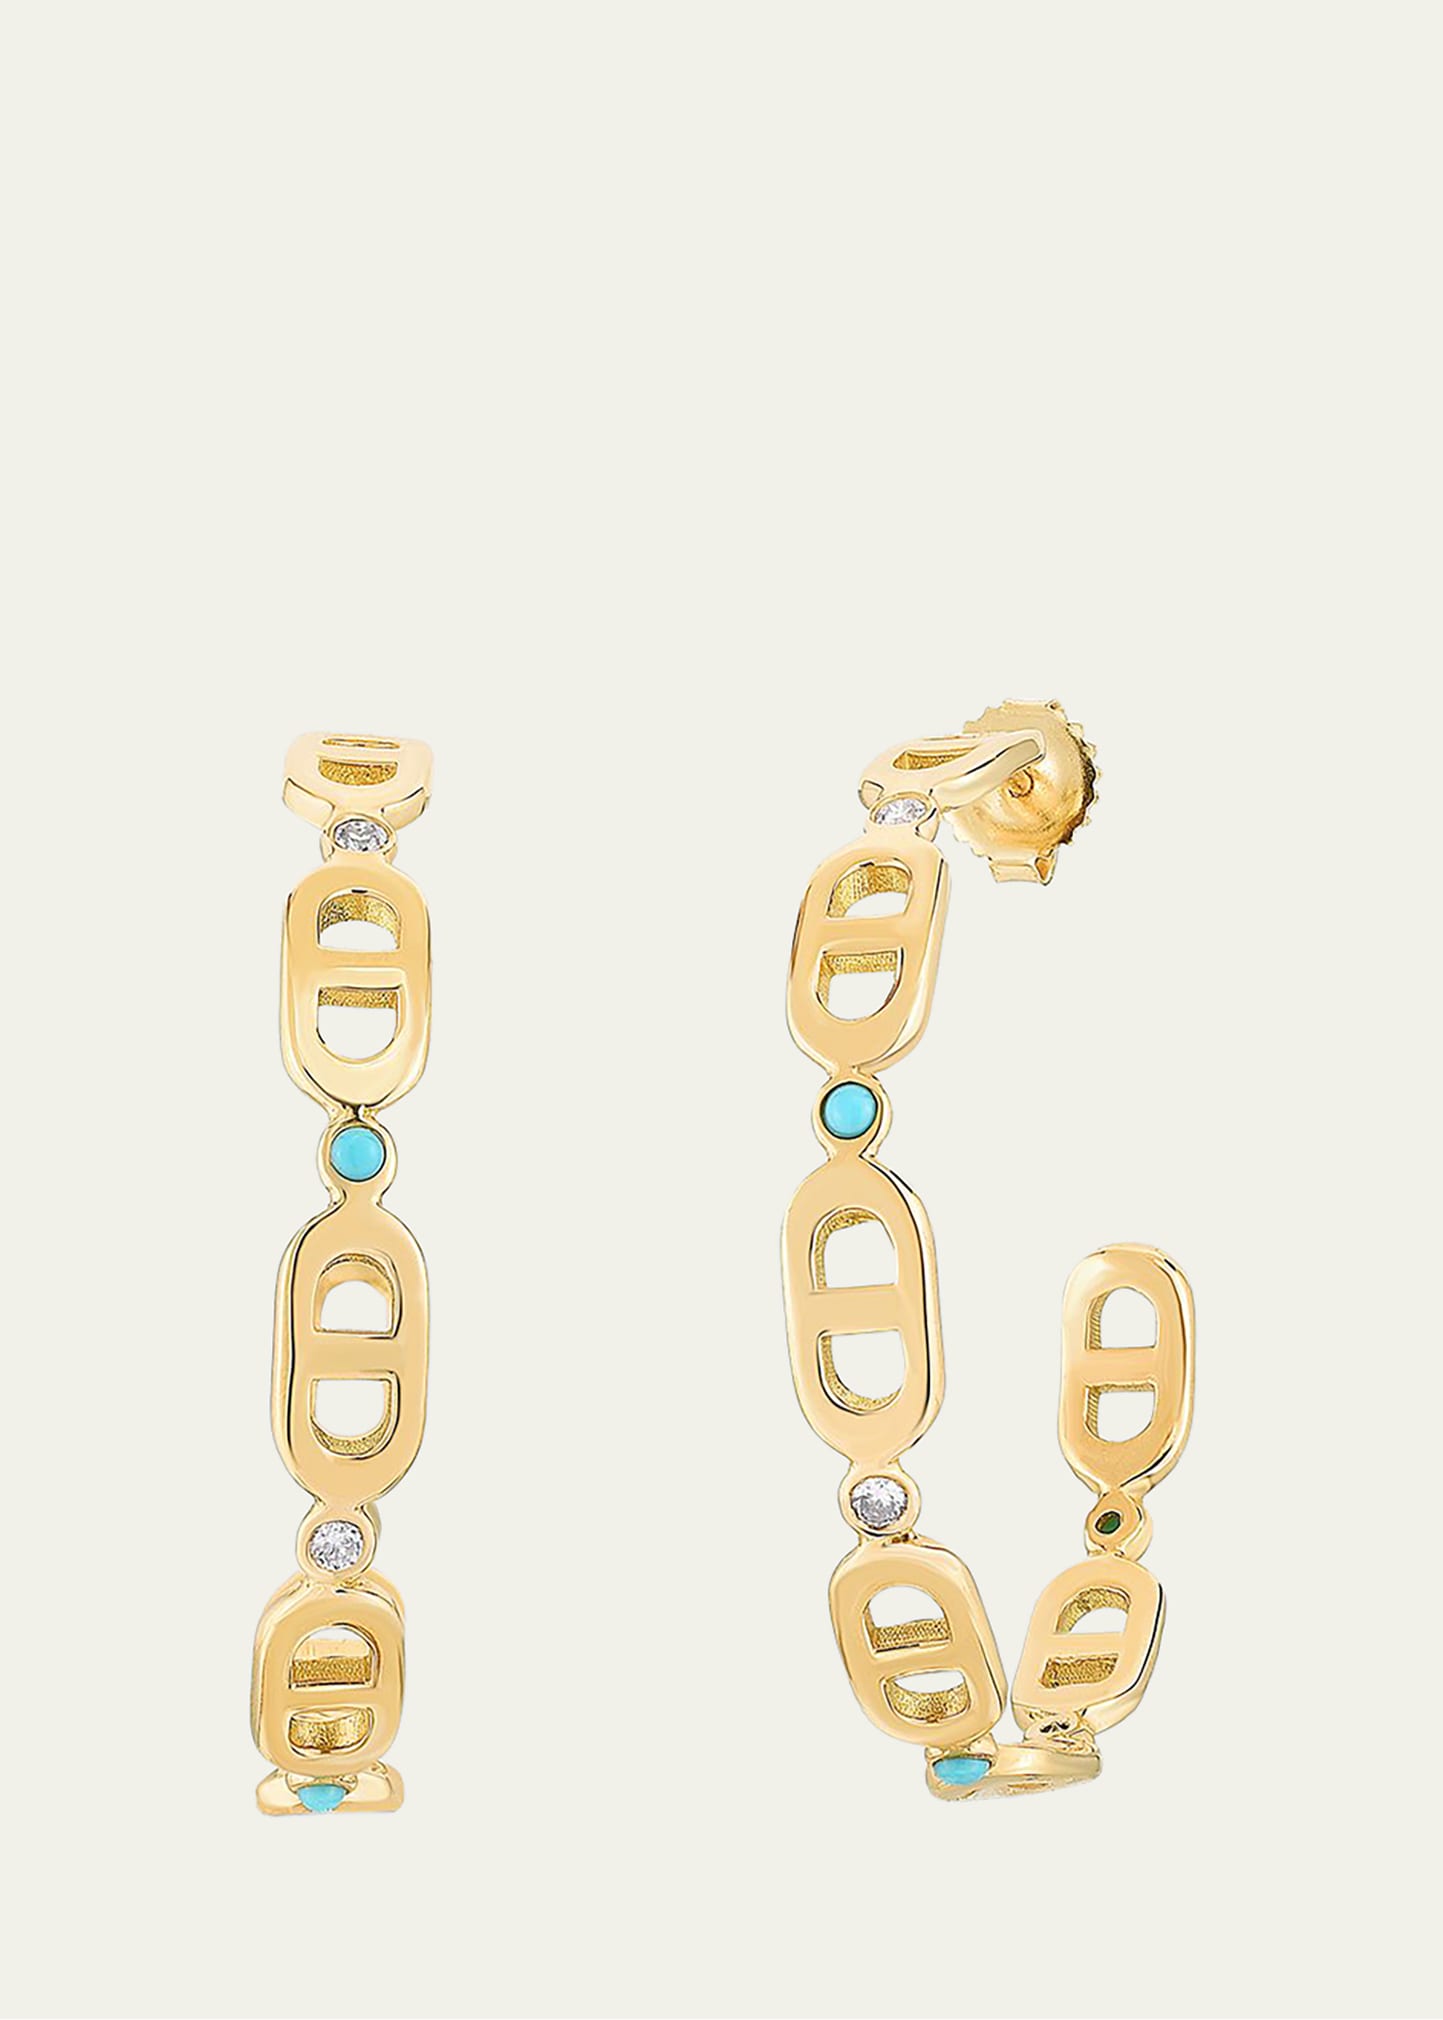 Audrey C. Jewels Cheval 18k Gold Hoop Earrings - Small